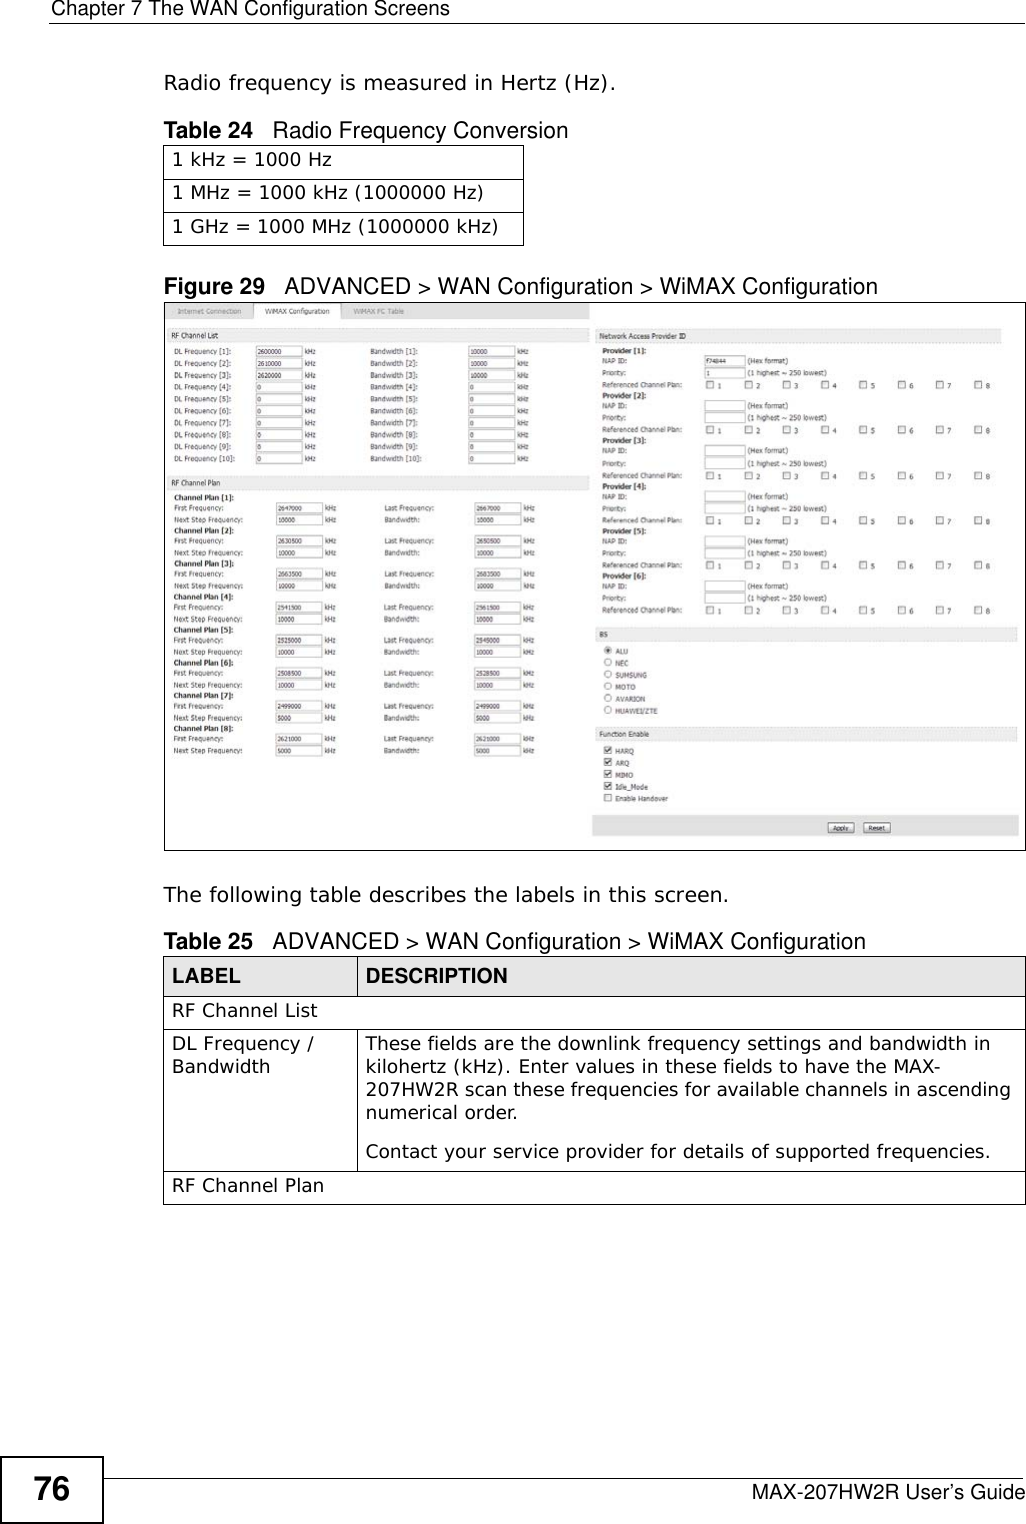 Chapter 7 The WAN Configuration ScreensMAX-207HW2R User’s Guide76Radio frequency is measured in Hertz (Hz). Figure 29   ADVANCED &gt; WAN Configuration &gt; WiMAX ConfigurationThe following table describes the labels in this screen.Table 24   Radio Frequency Conversion1 kHz = 1000 Hz1 MHz = 1000 kHz (1000000 Hz)1 GHz = 1000 MHz (1000000 kHz)Table 25   ADVANCED &gt; WAN Configuration &gt; WiMAX ConfigurationLABEL DESCRIPTIONRF Channel ListDL Frequency / Bandwidth These fields are the downlink frequency settings and bandwidth in kilohertz (kHz). Enter values in these fields to have the MAX-207HW2R scan these frequencies for available channels in ascending numerical order.Contact your service provider for details of supported frequencies.RF Channel Plan